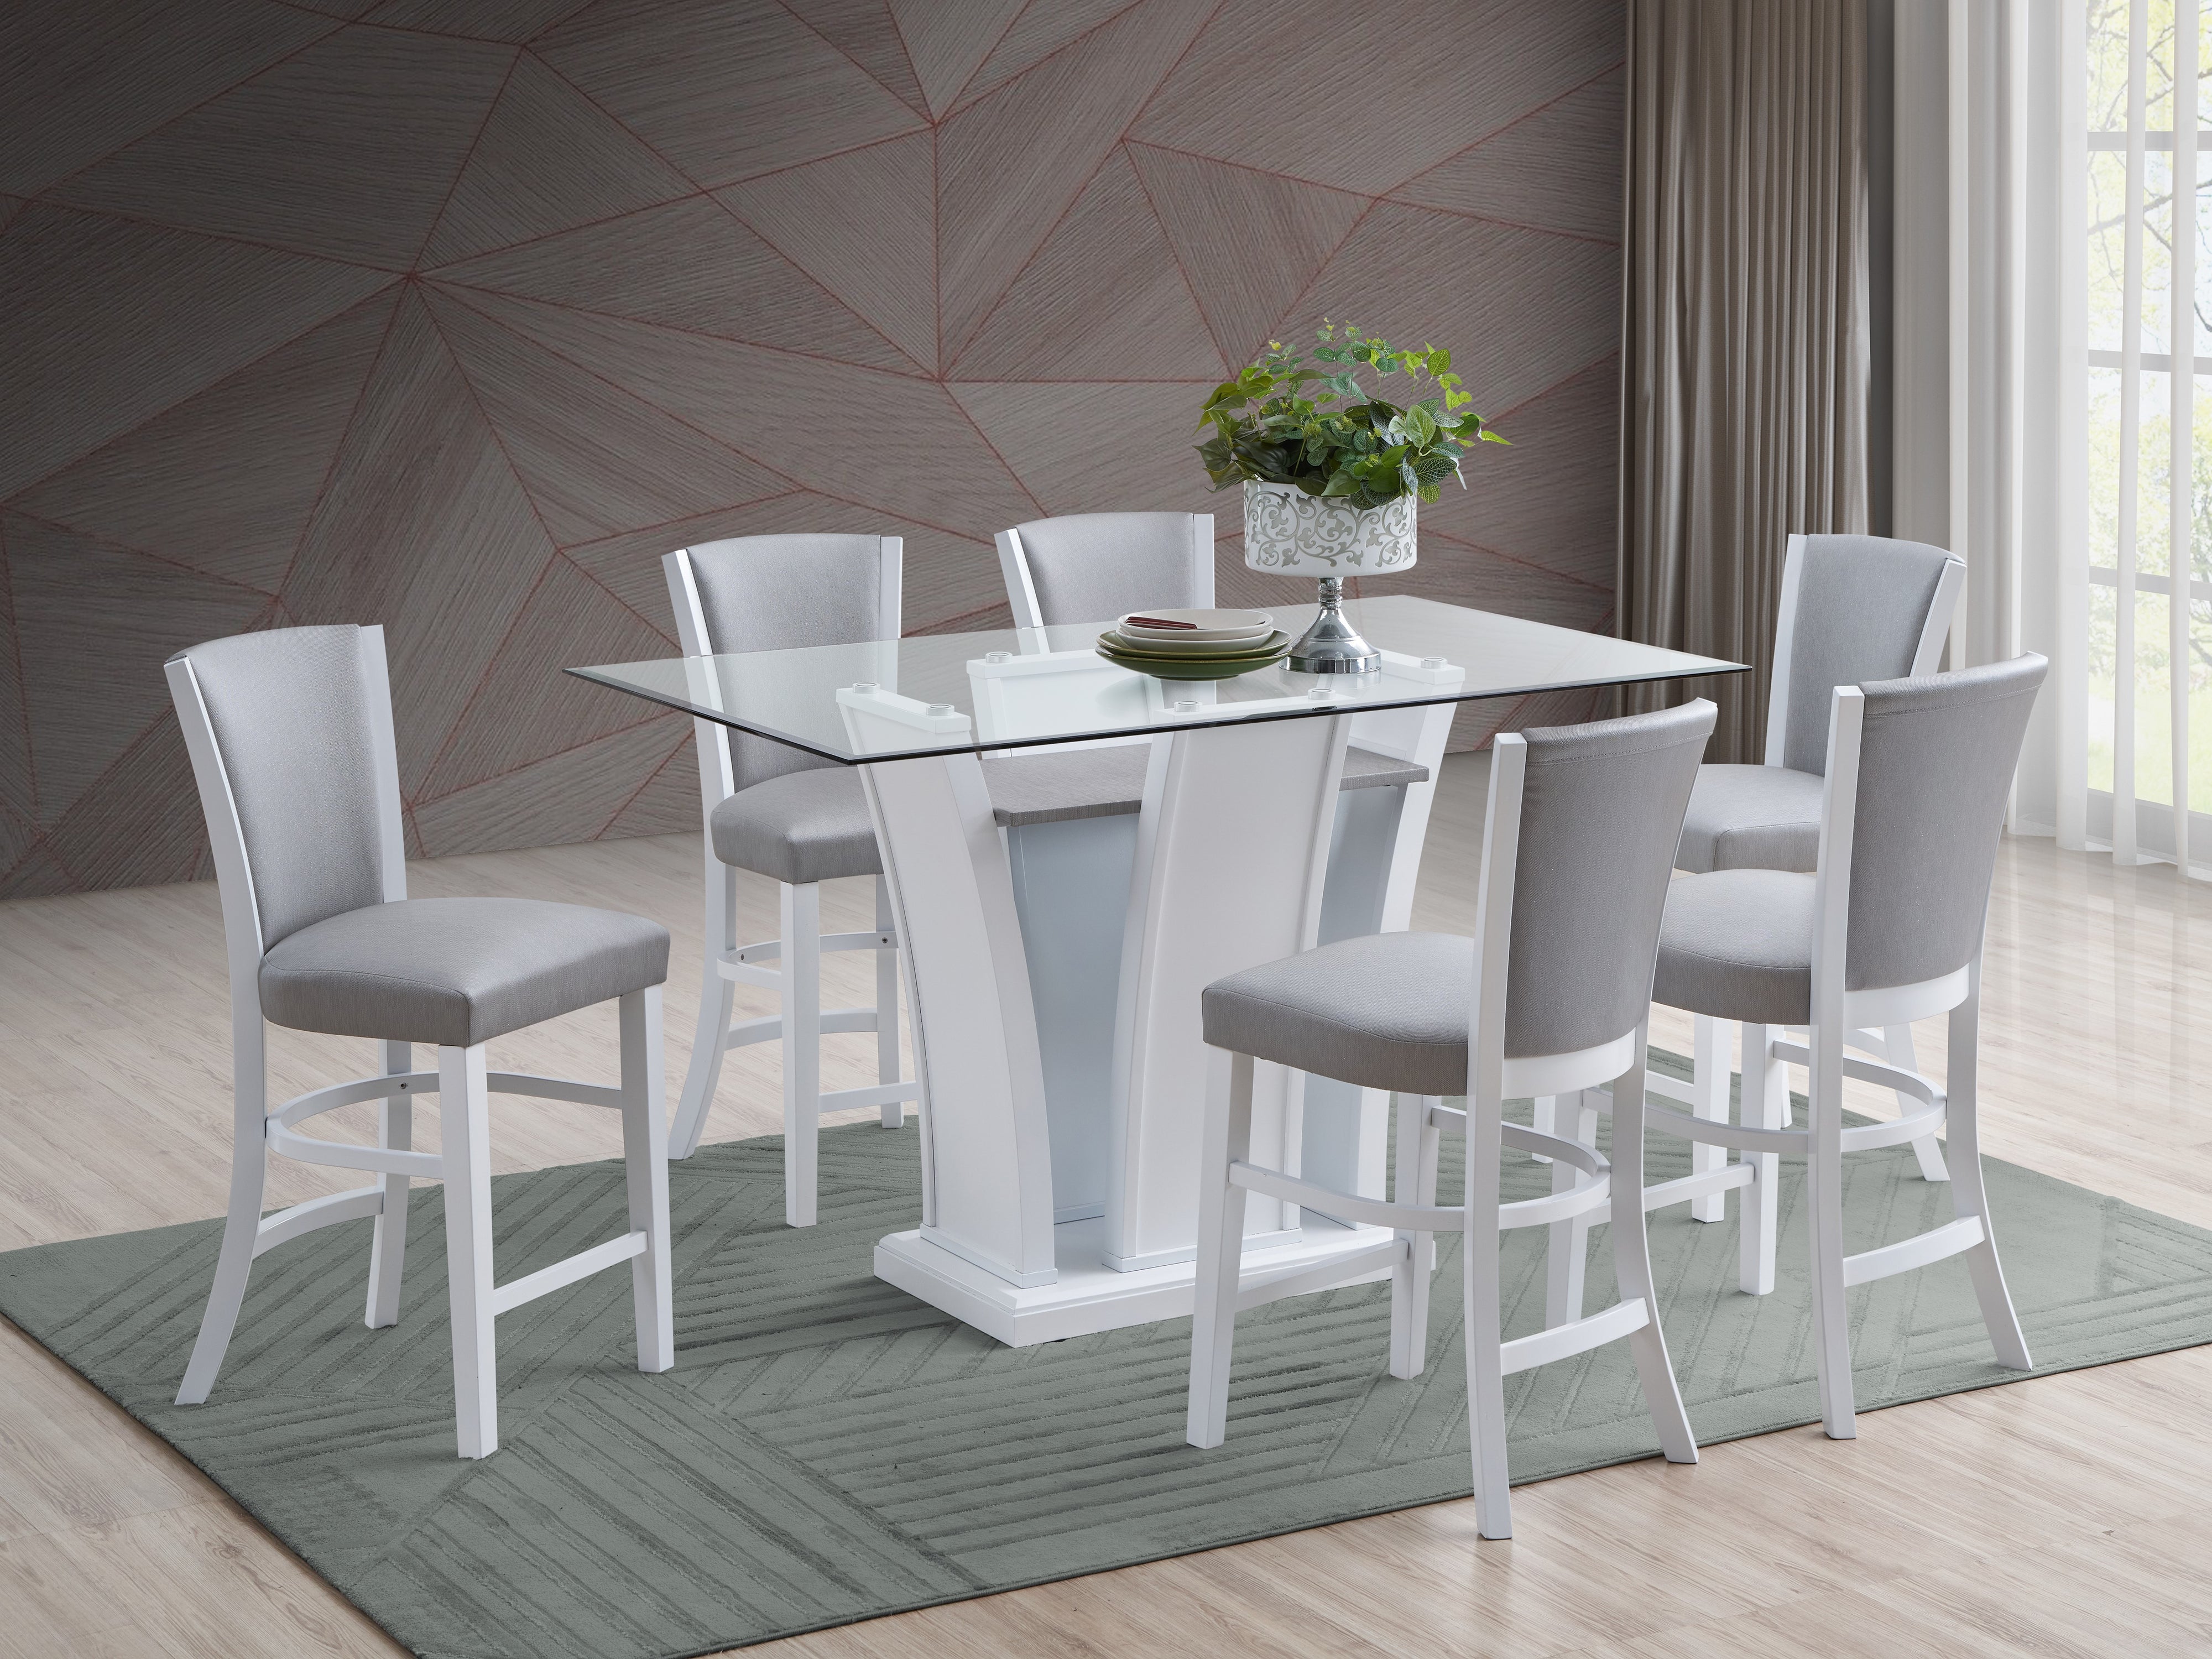 7 PIECE COUNTER HEIGHT DINING SET